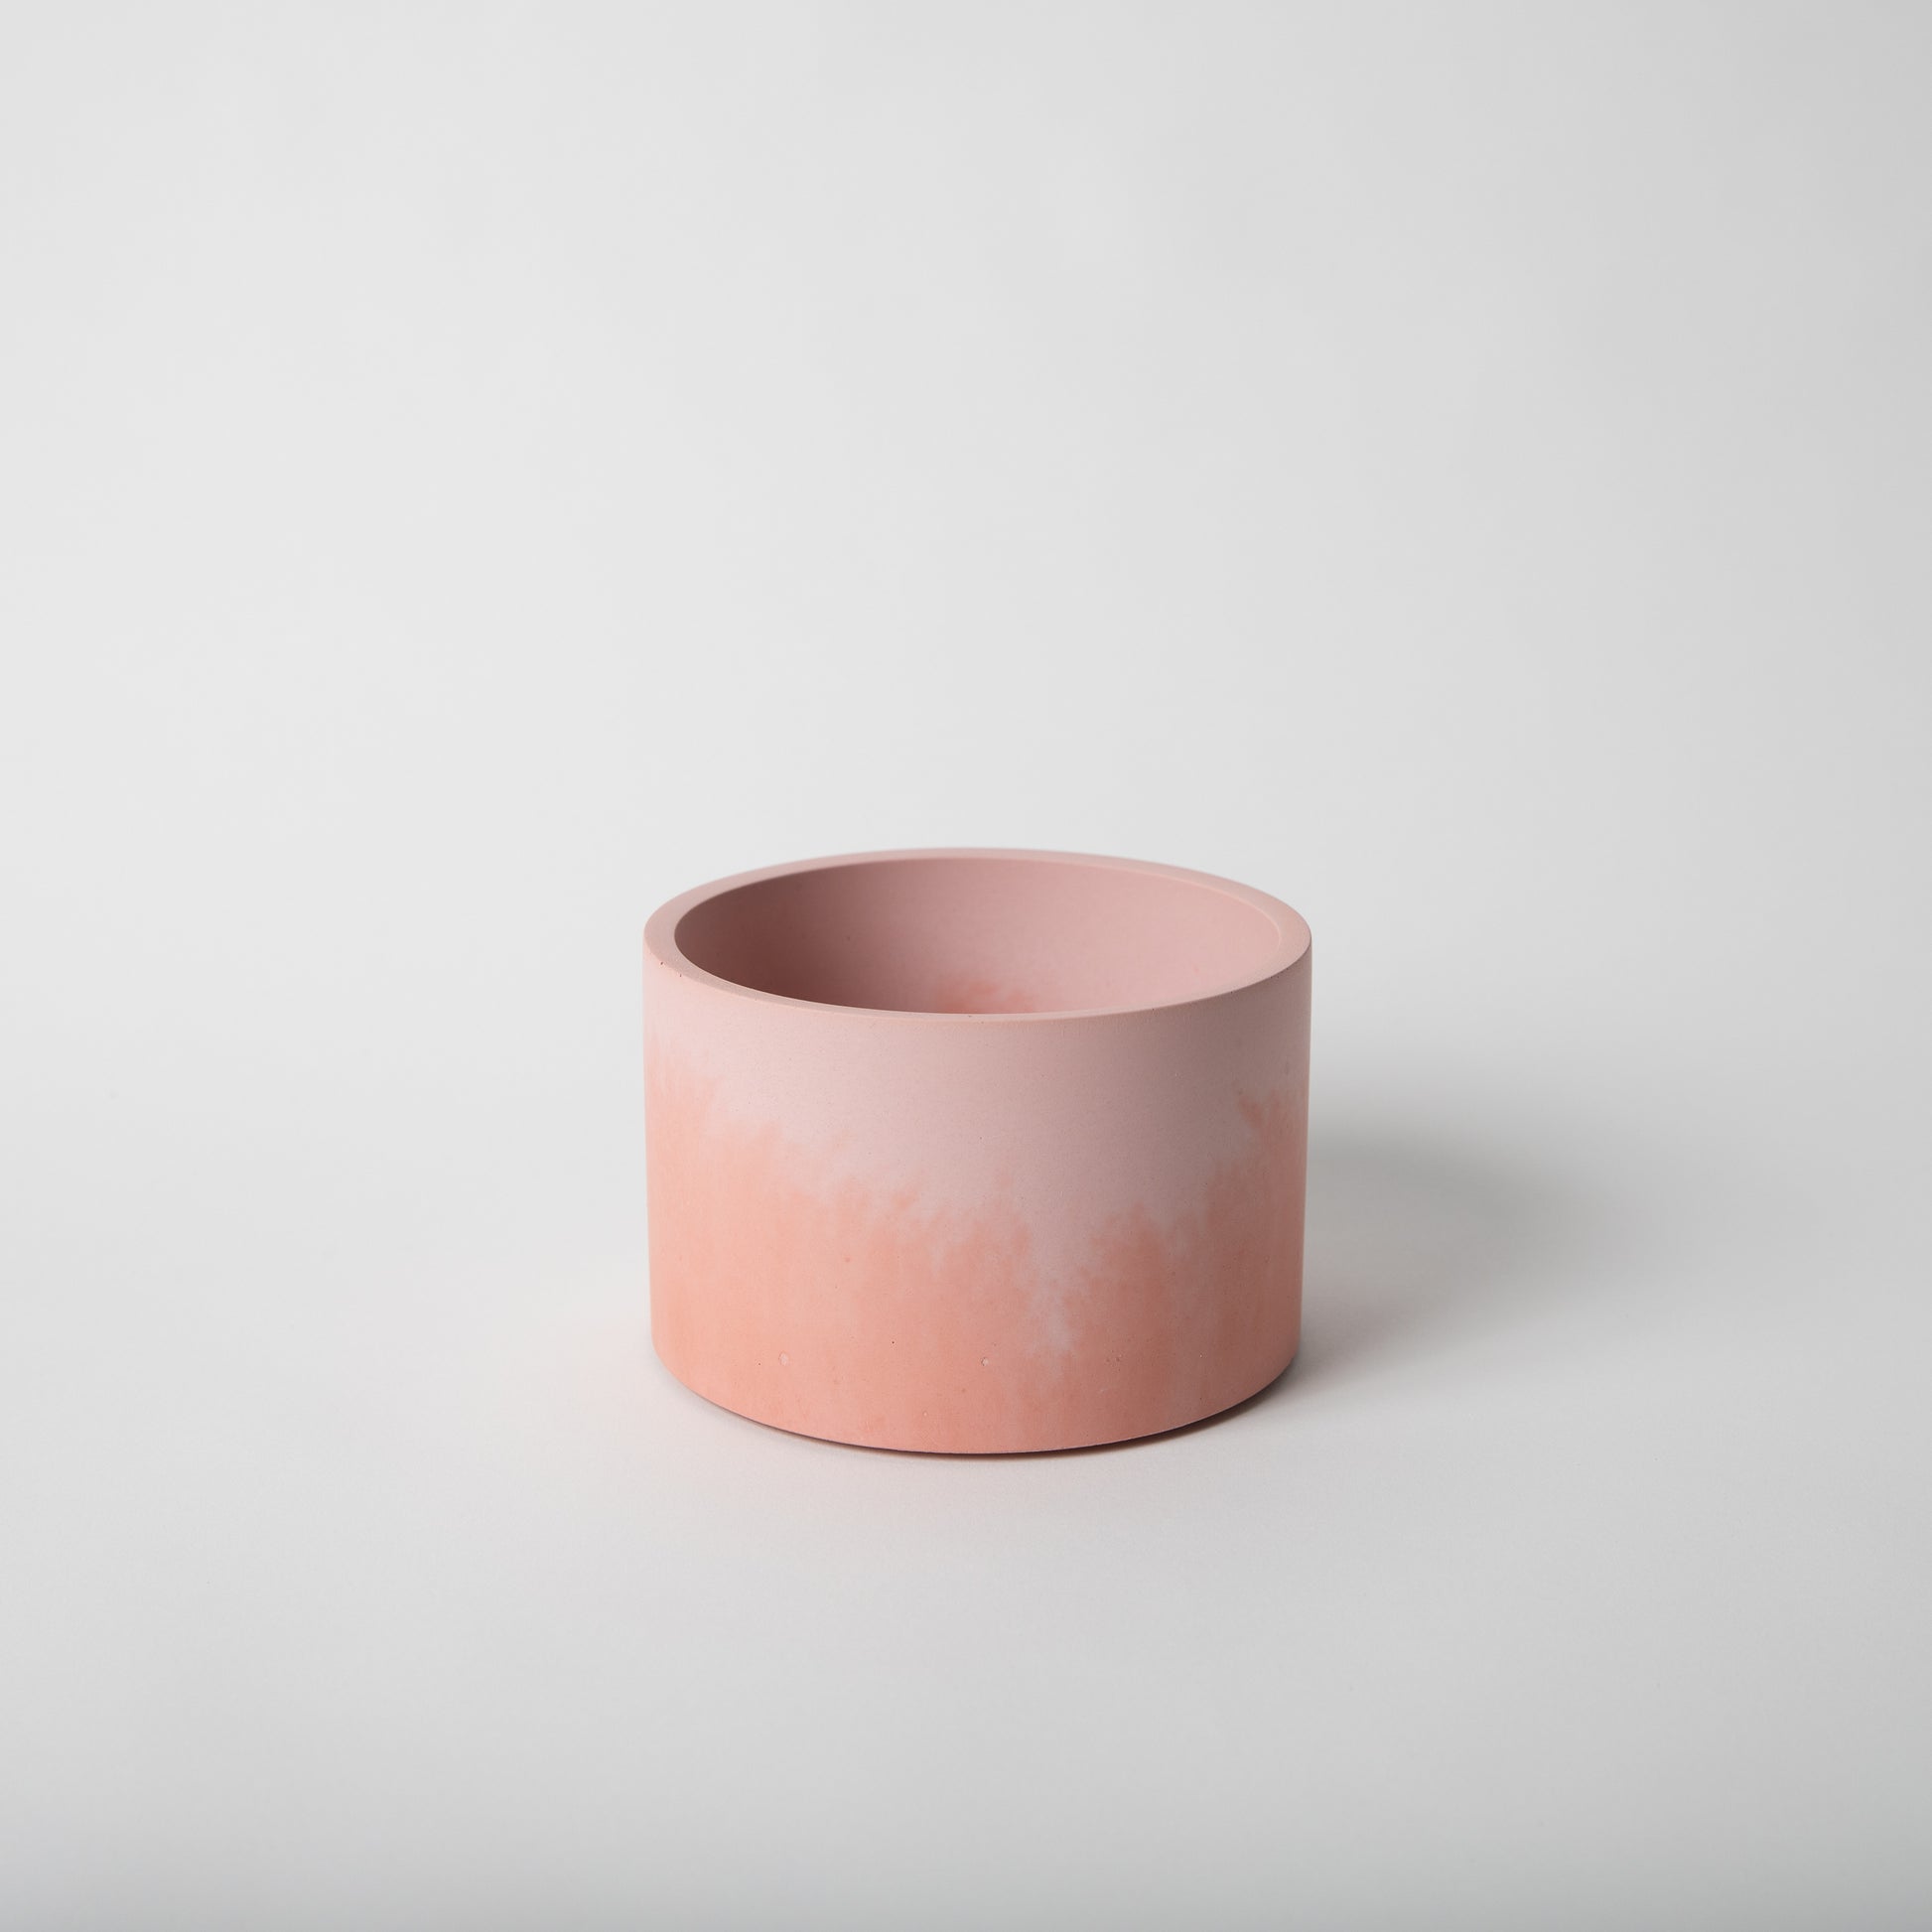 5 inch concrete vessel in pink and coral.